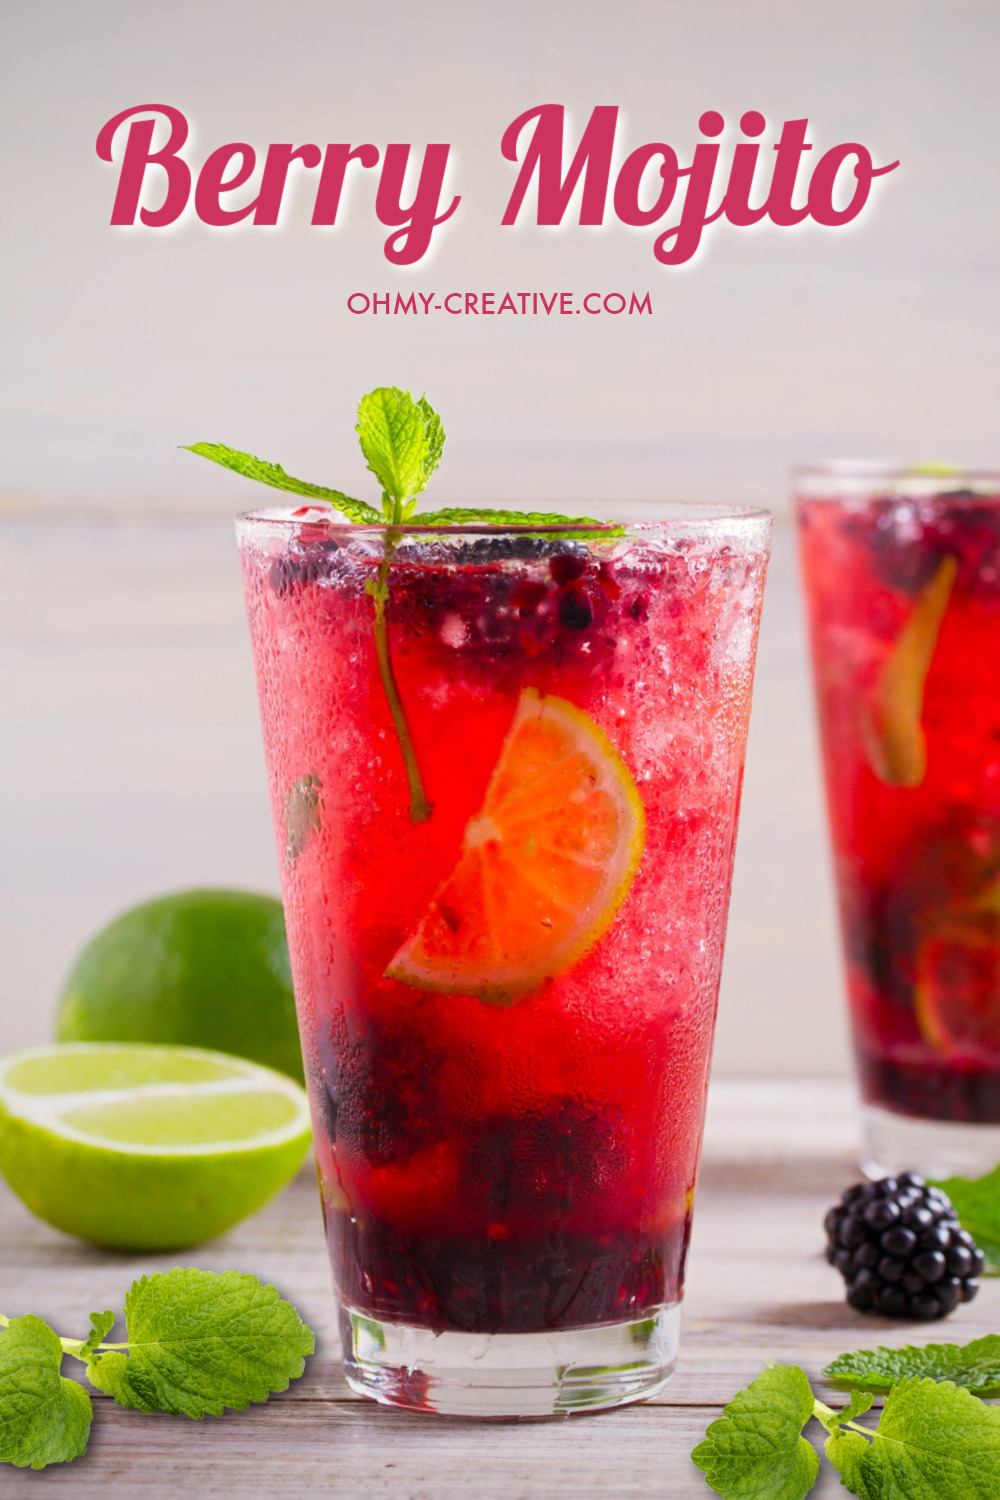 A berry mojito on a gray wood background with sliced limes and mint. This mixed berry mojito is garnished with mint and a slice of lime.